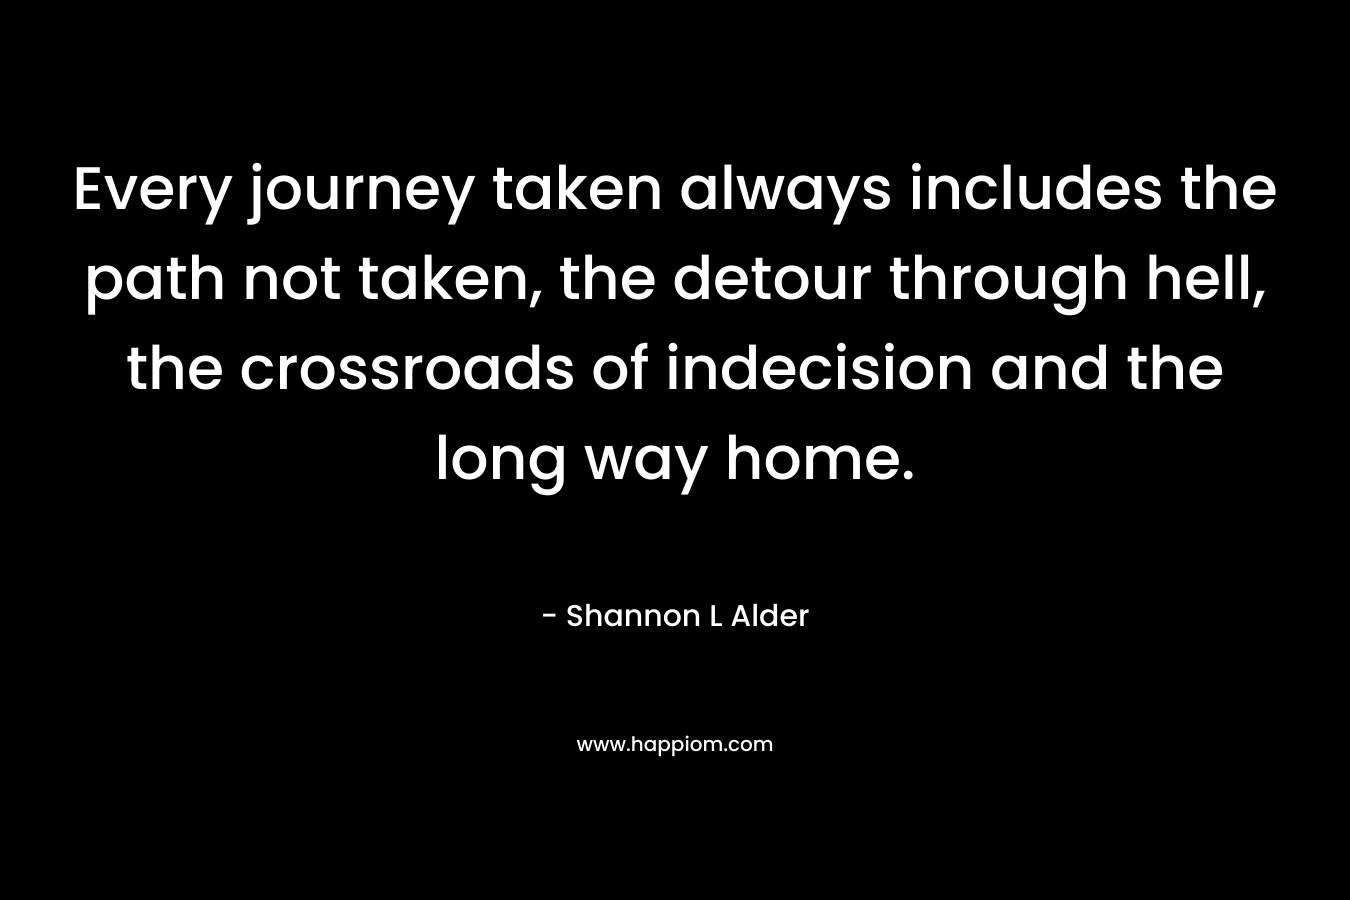 Every journey taken always includes the path not taken, the detour through hell, the crossroads of indecision and the long way home. – Shannon L Alder